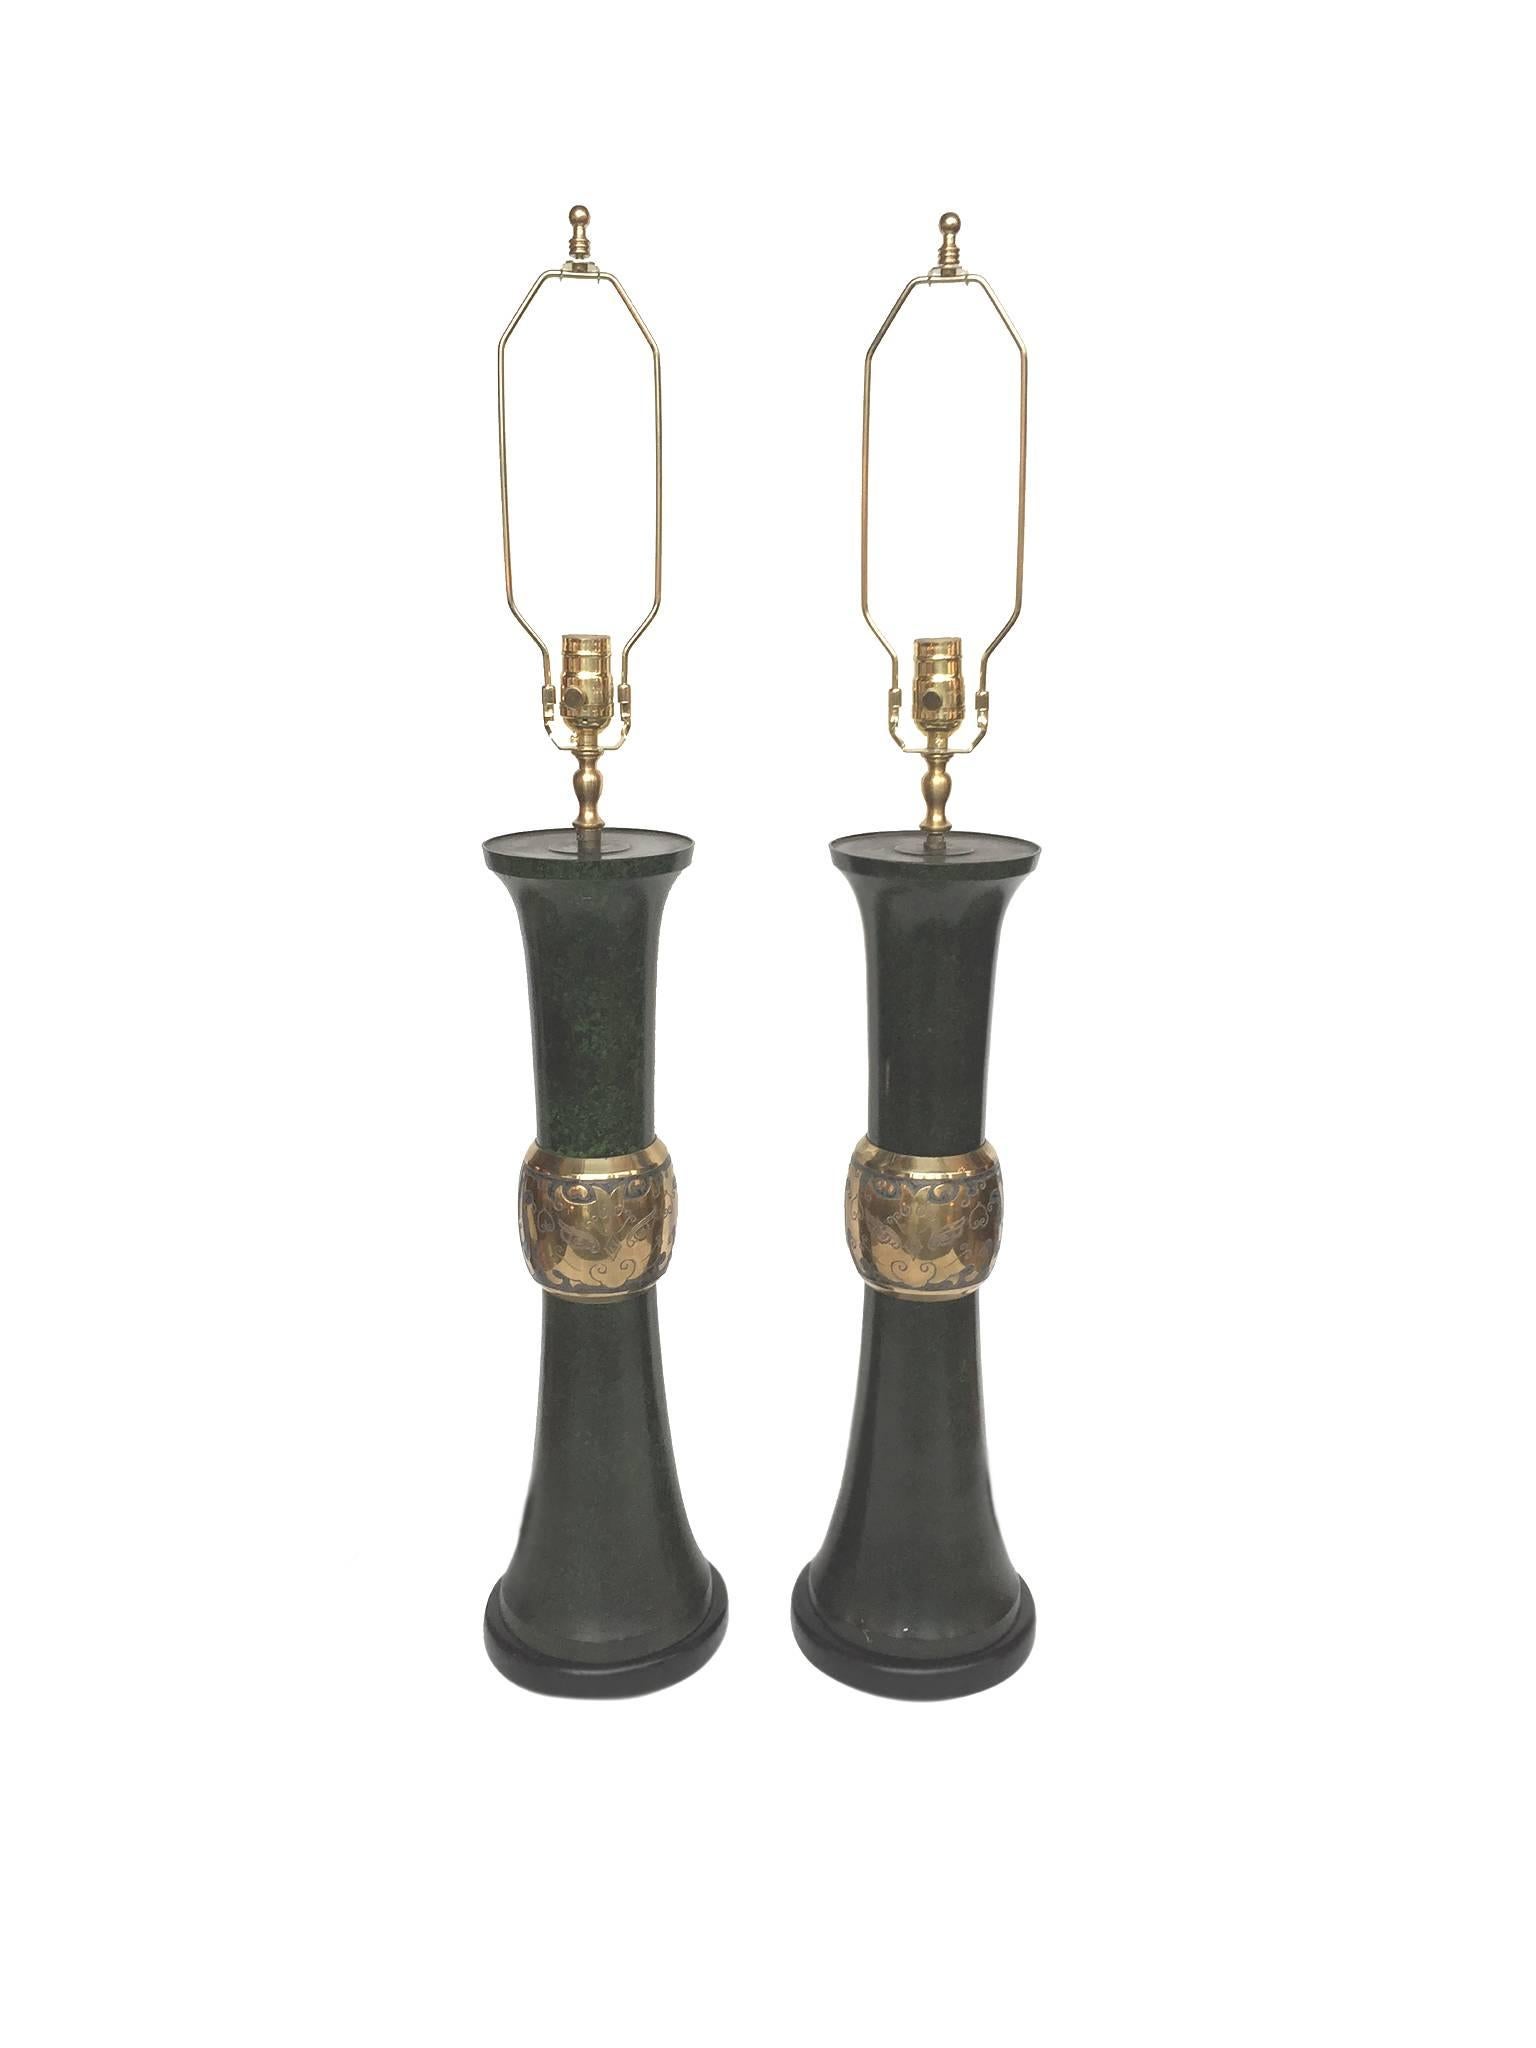 These two midcentury table lamps are comprised of metal bodies that have been finished in a rich, faux malachite green. Their bases are ebonized wood. The lamps are newly rewired and paired with new parchment shades. Their brass hardware is also new